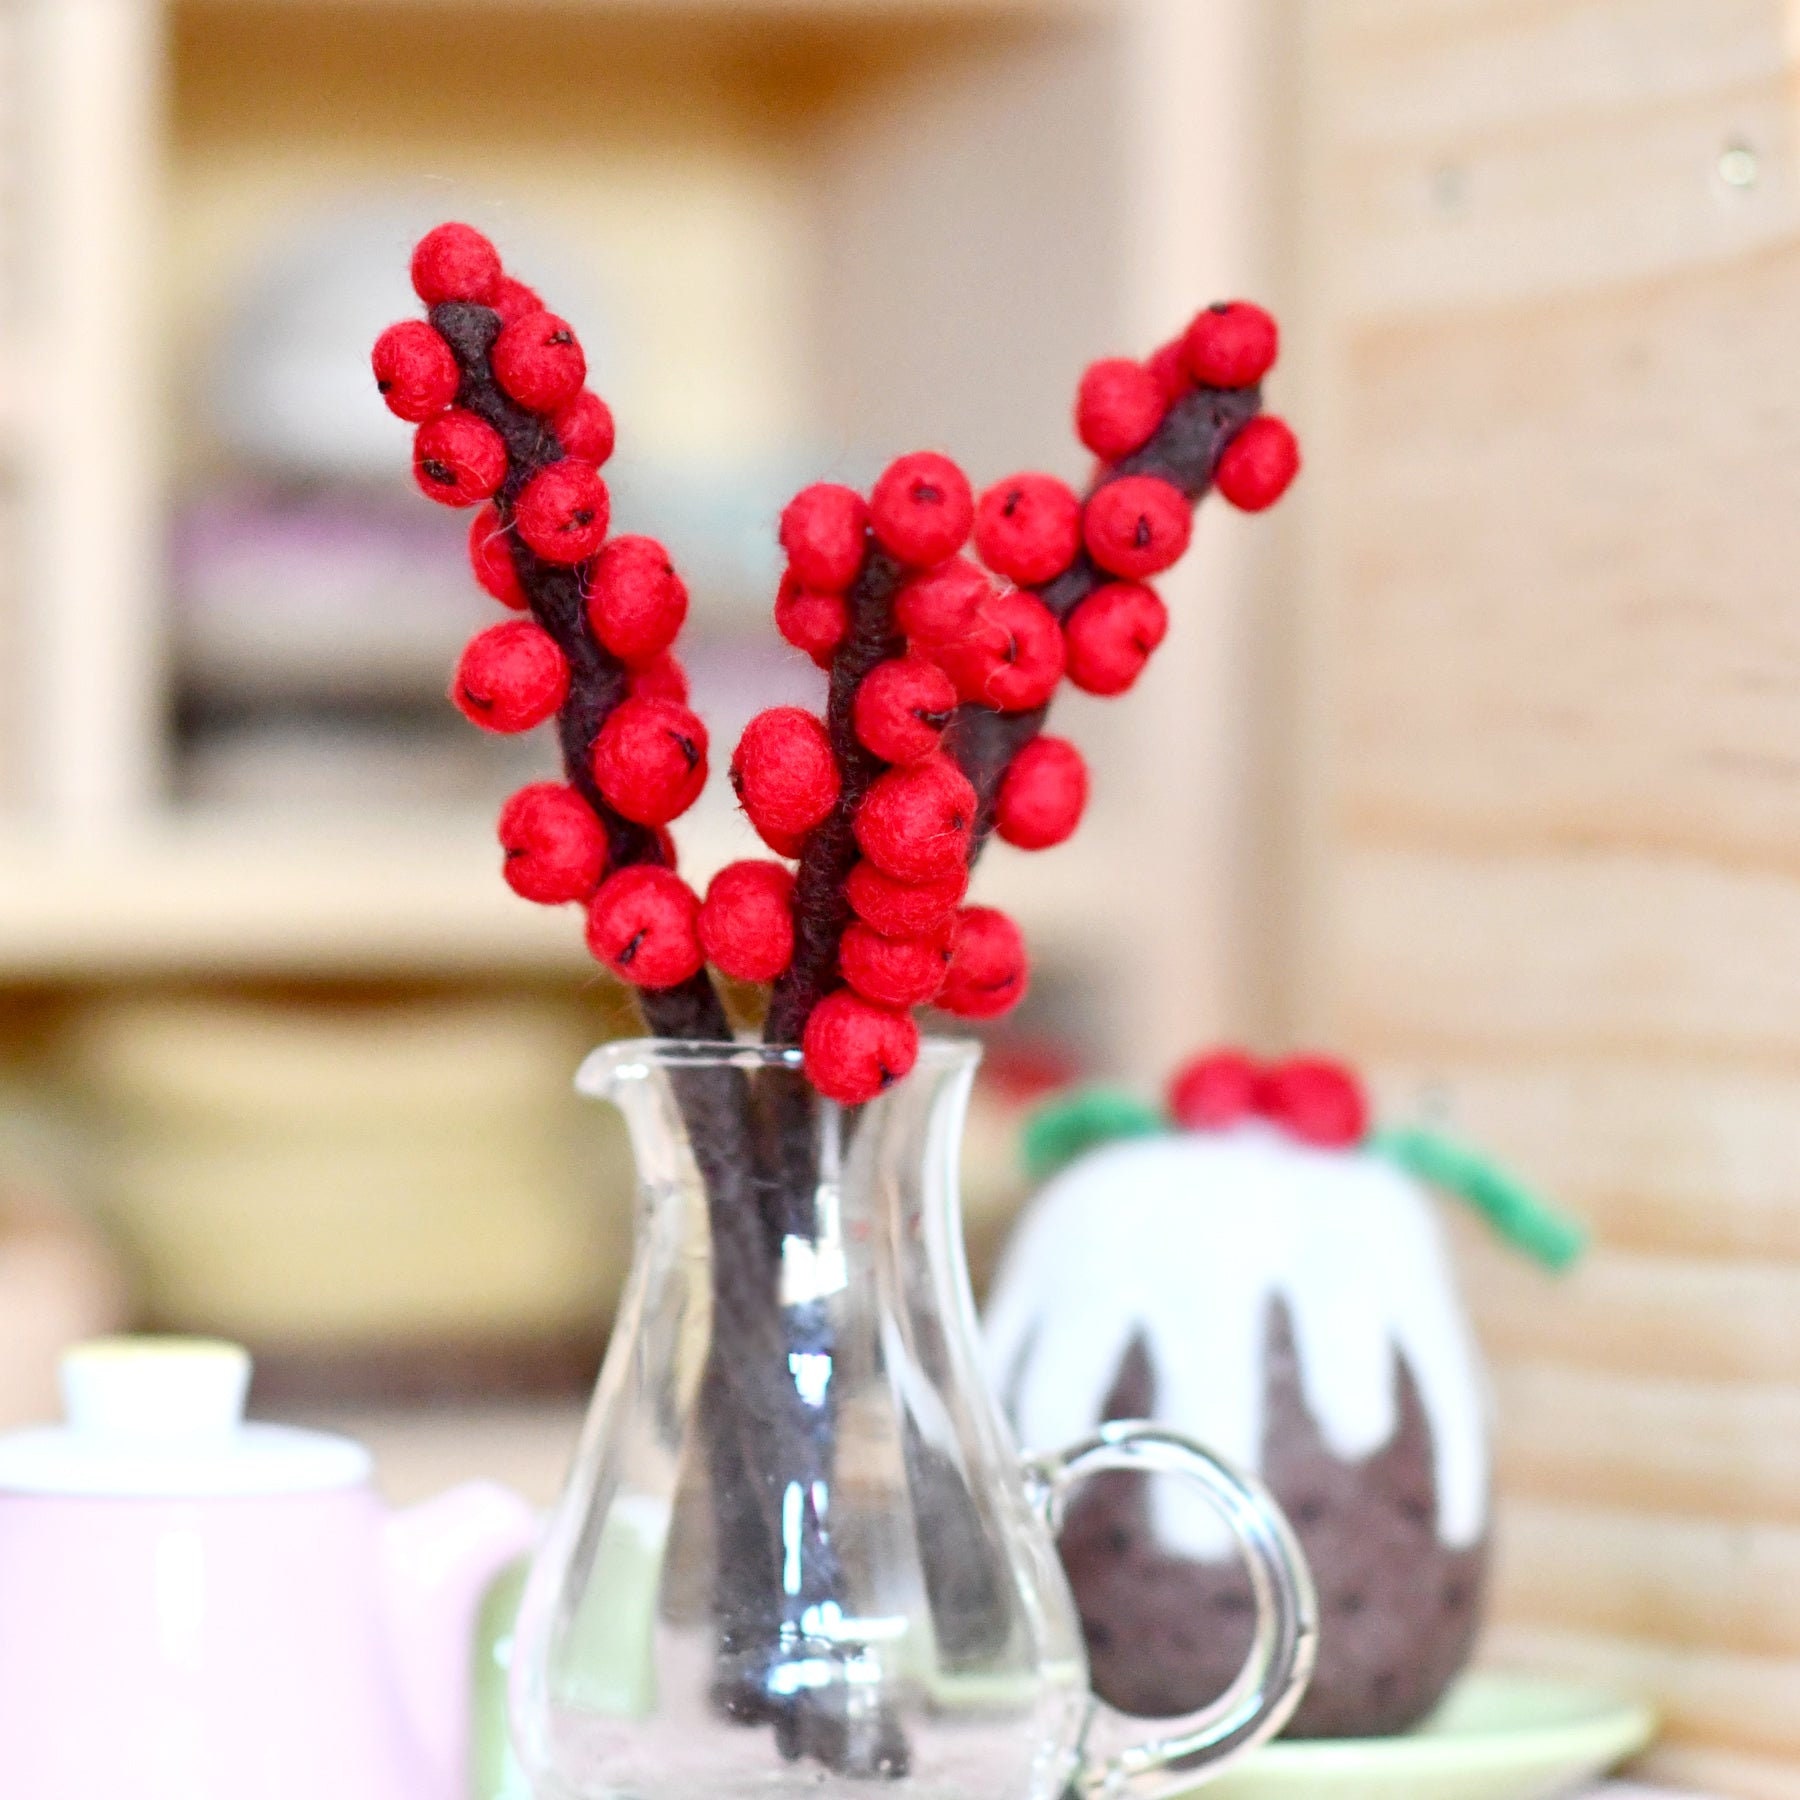 Felt Red Winter Berry Stems (Set of 3) - The Curated Parcel